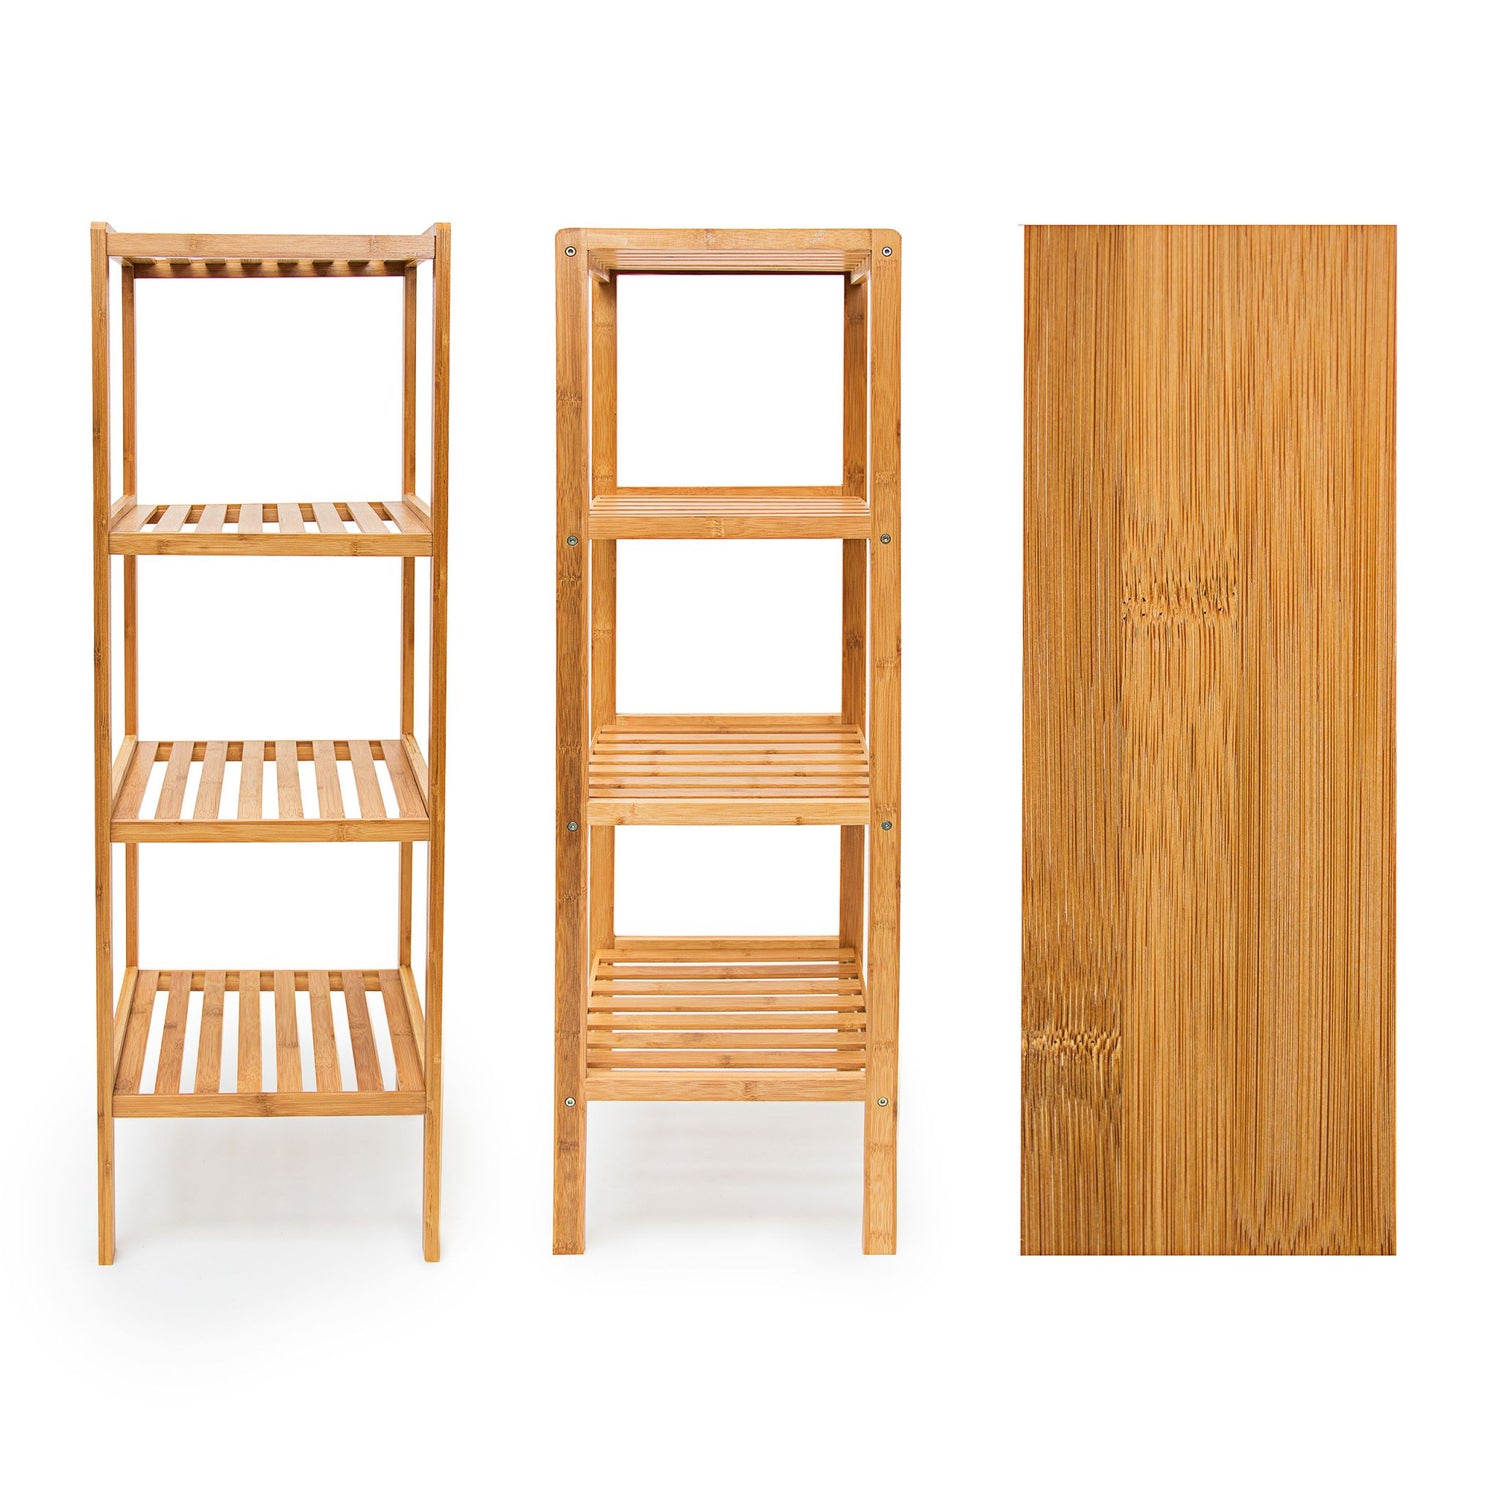 RelaxDays 4-tier bamboo shelving unit Bamboo Bathrooms